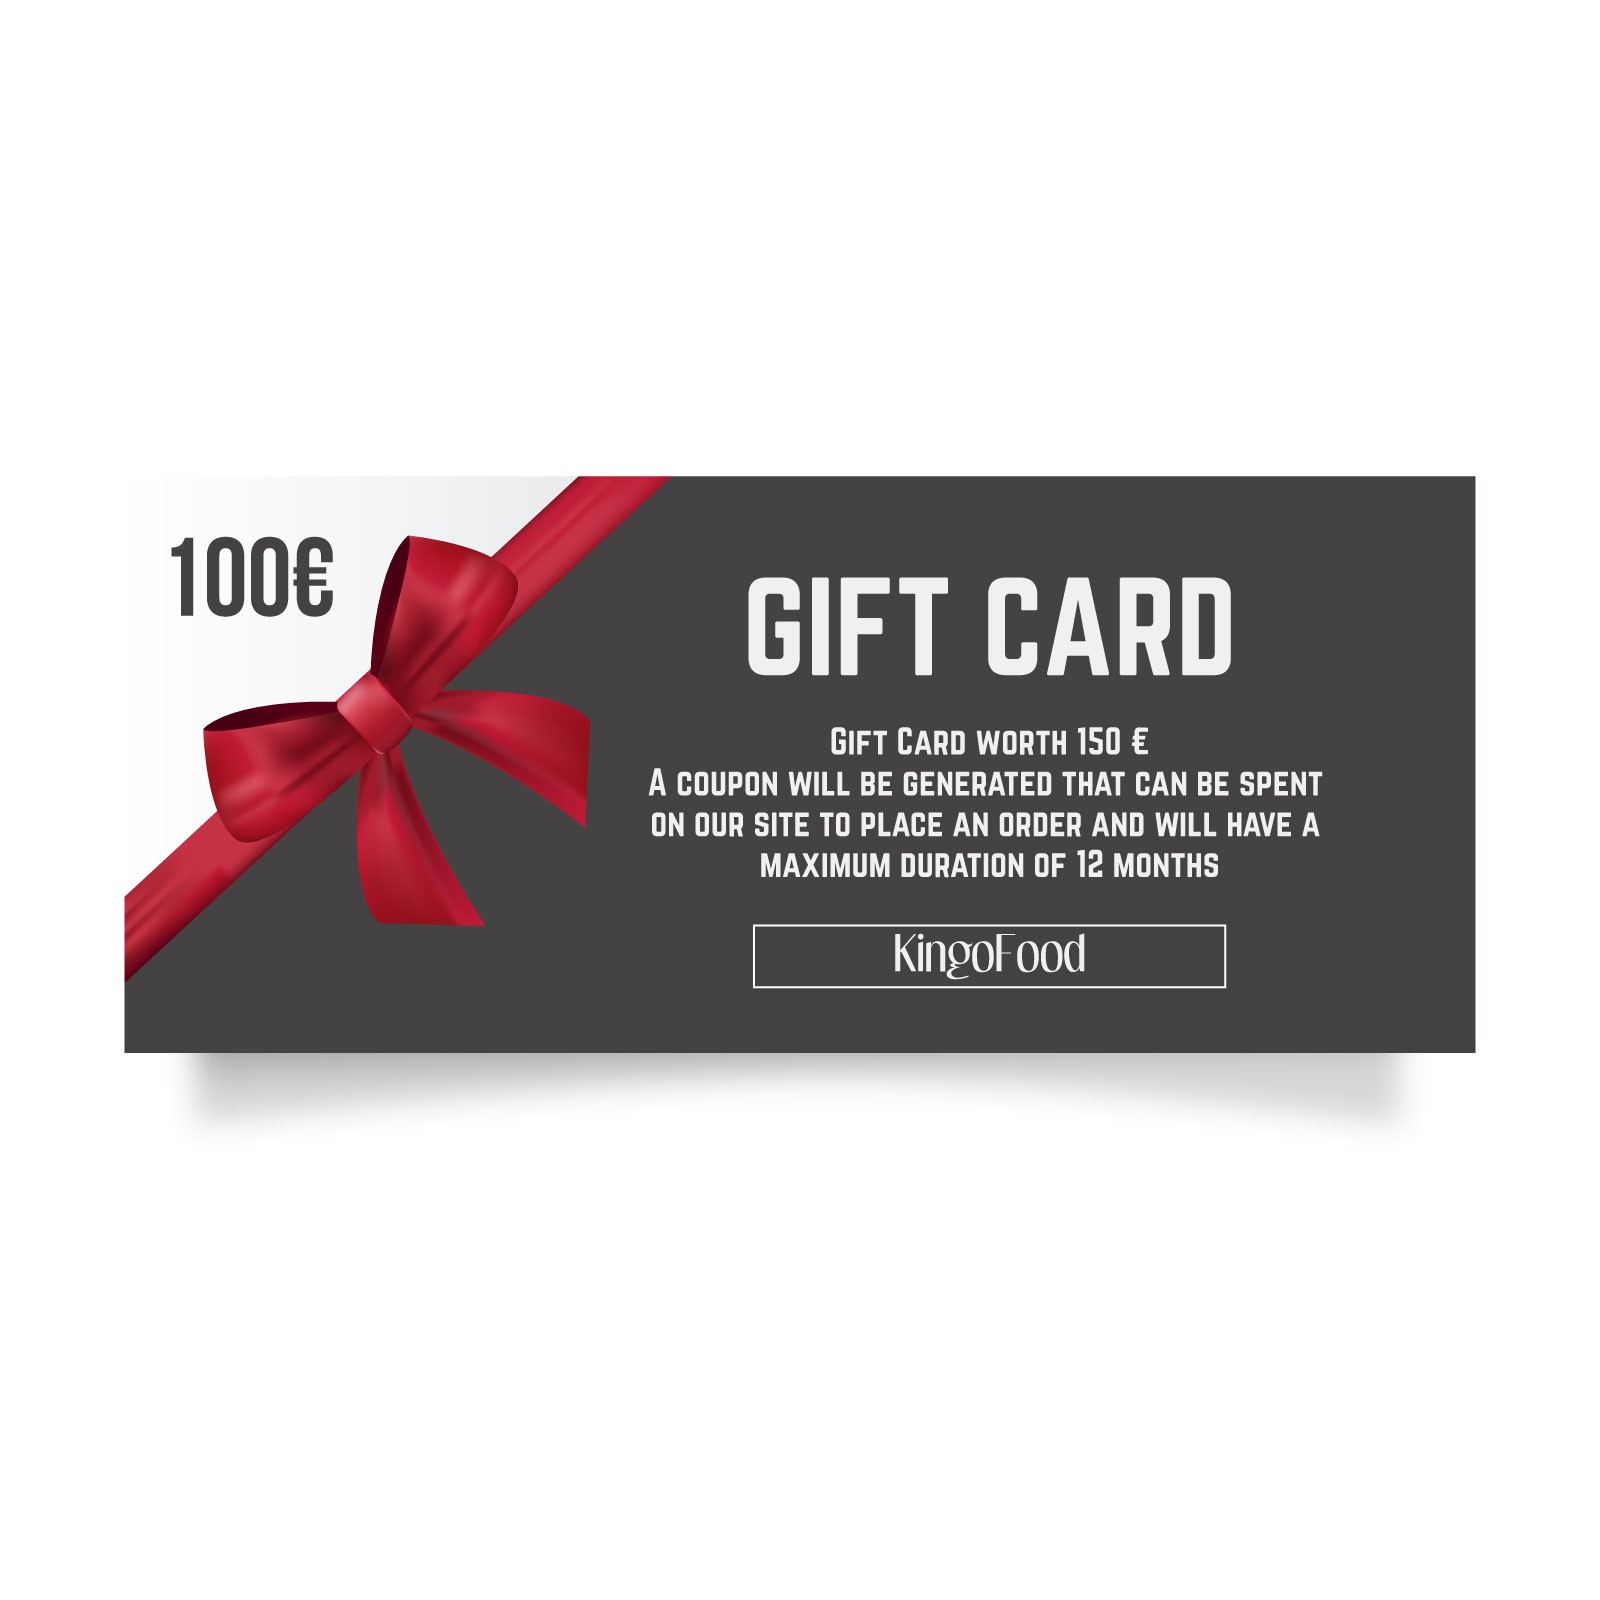 Gift Card worth 100 €
A coupon will be generated which can be spent on the website www.kingofood.com to place an order and will have a maximum duration of 24 months.
For more information you can contact us!